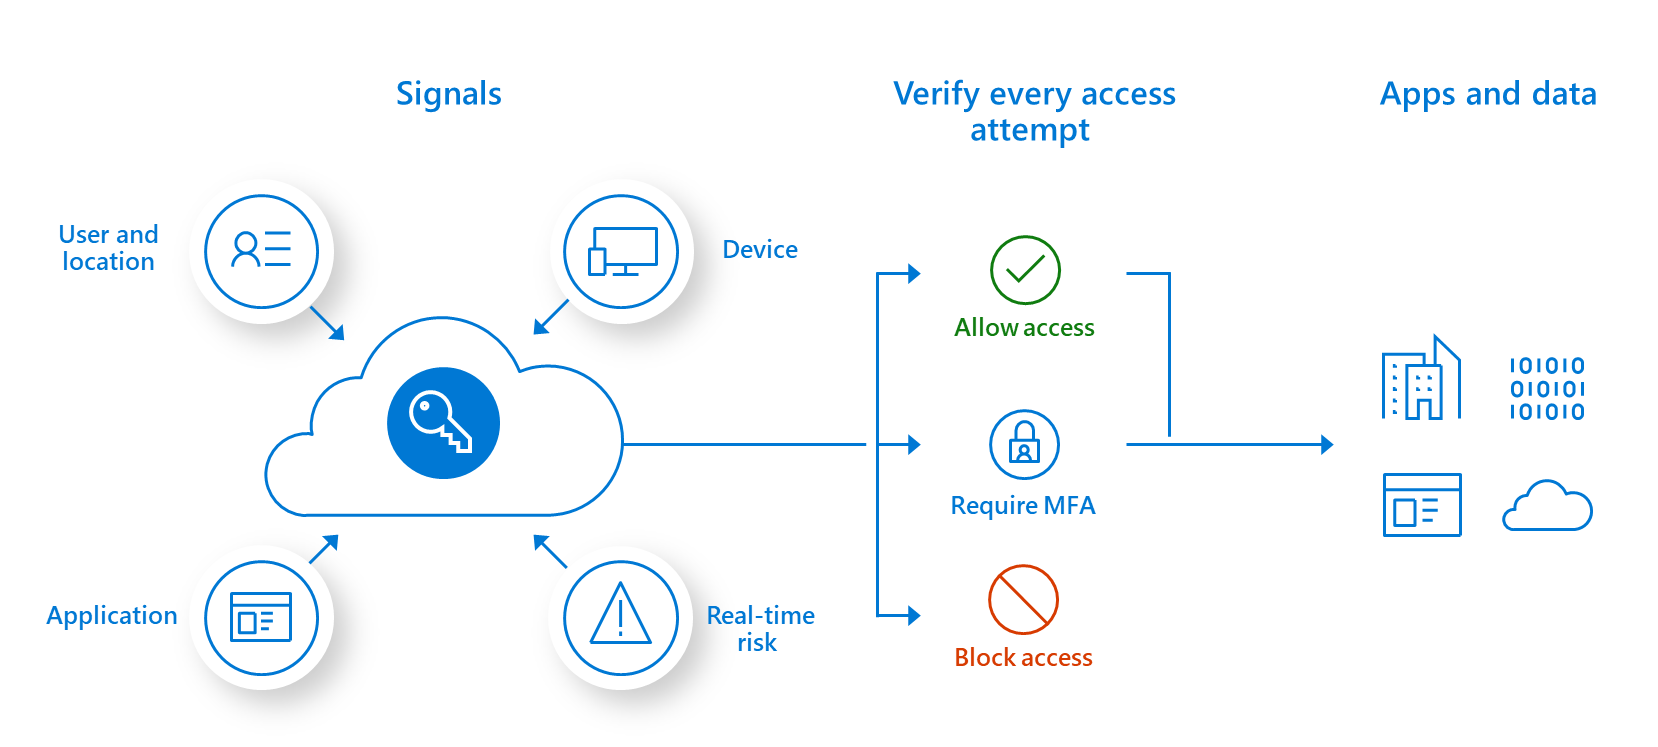 Infographic outlining conditional access. Signals (user location, device, real-time risk, application), Verify every access attempt (allow access, require MFA, or block access), and Apps and data.